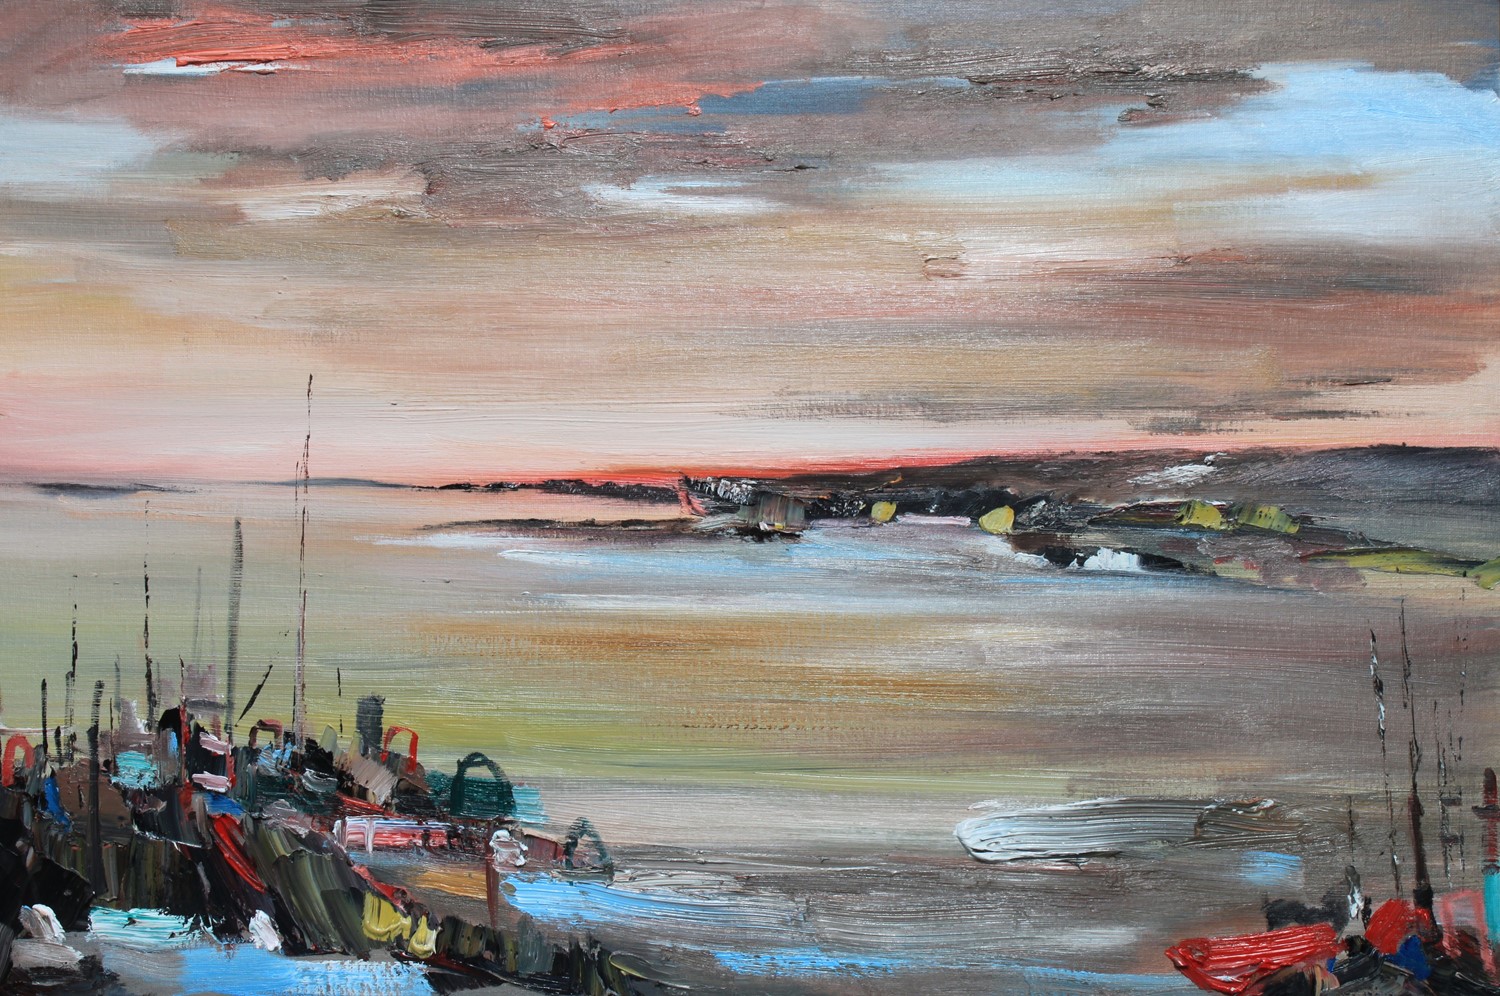 'Washed Ashore' by artist Rosanne Barr